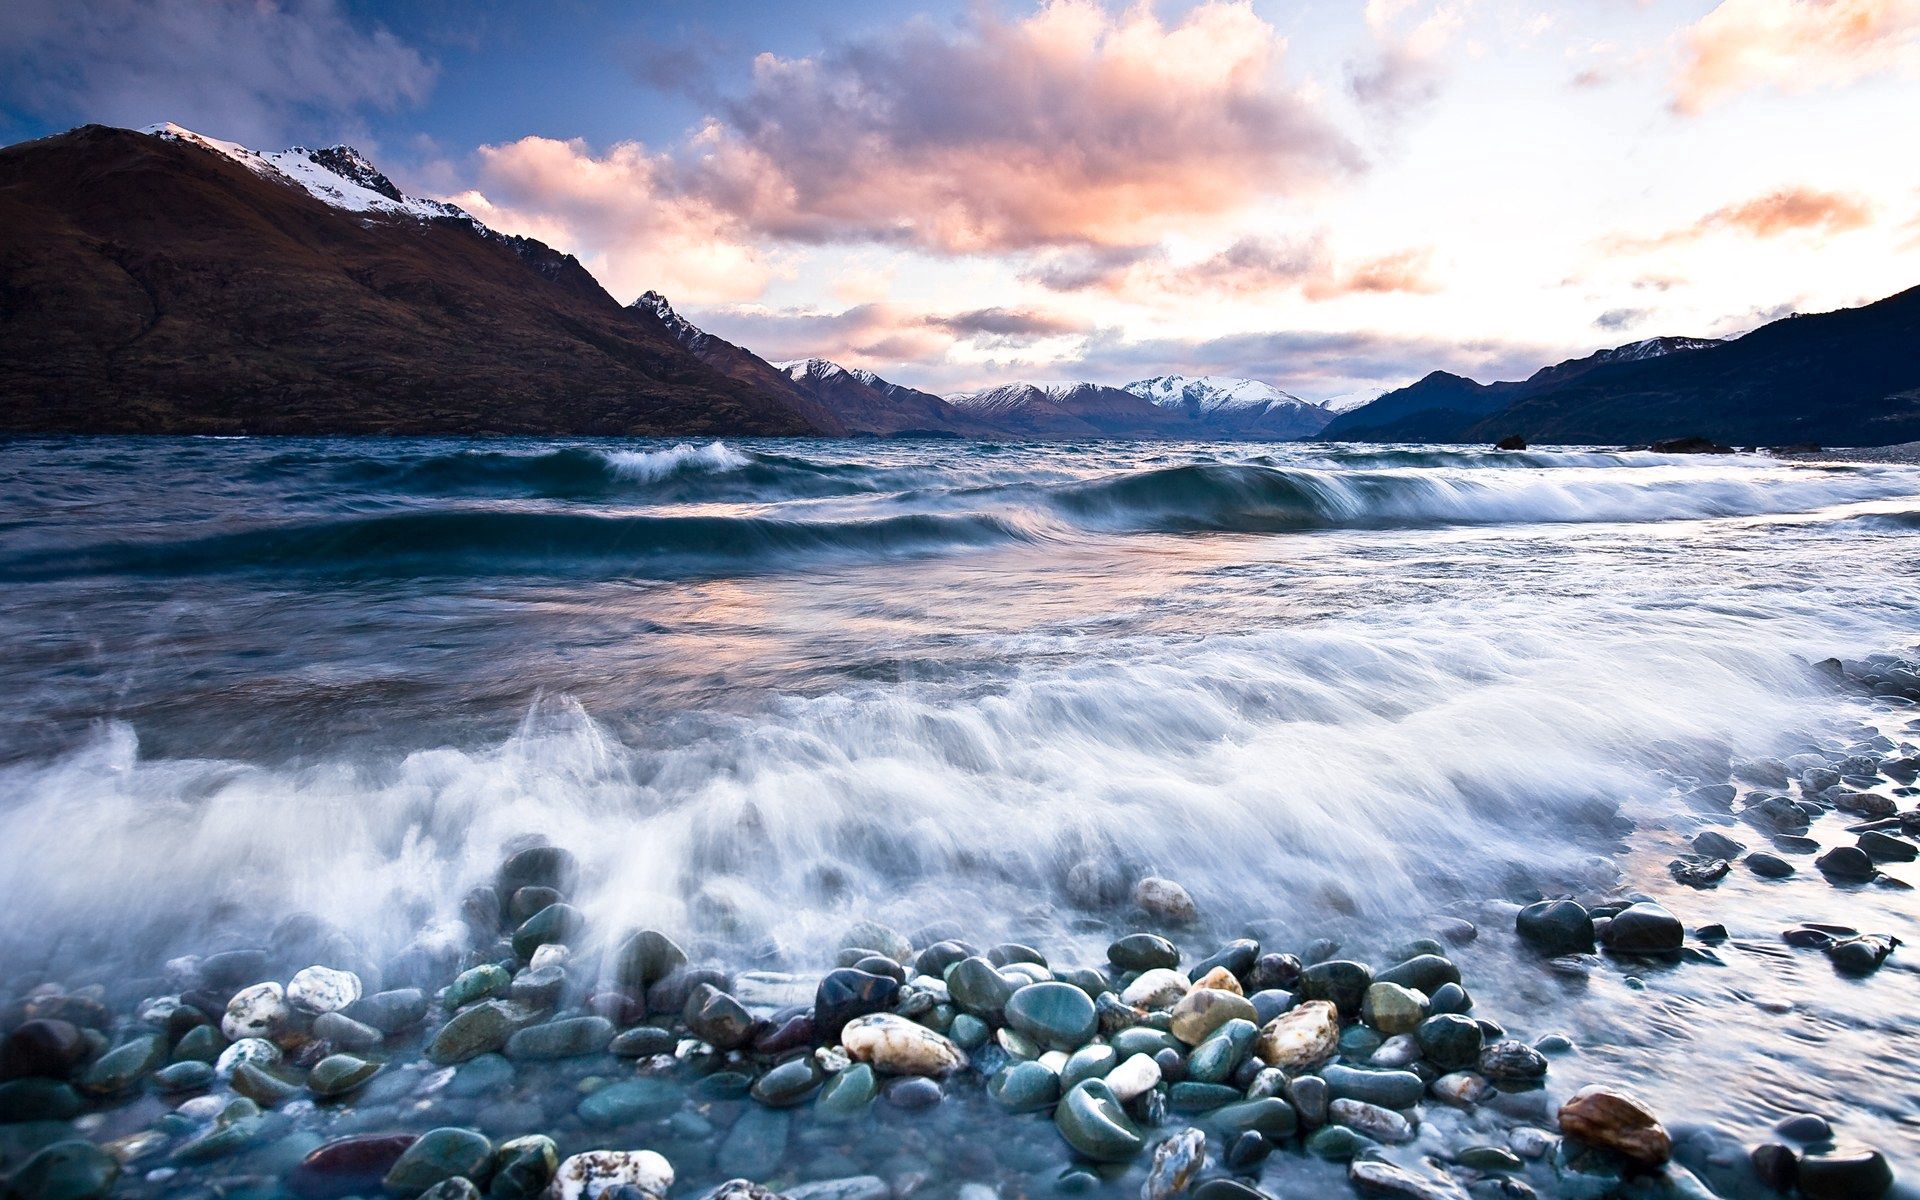 clouds, nature, water, stones, mountains, beach, foam, wave